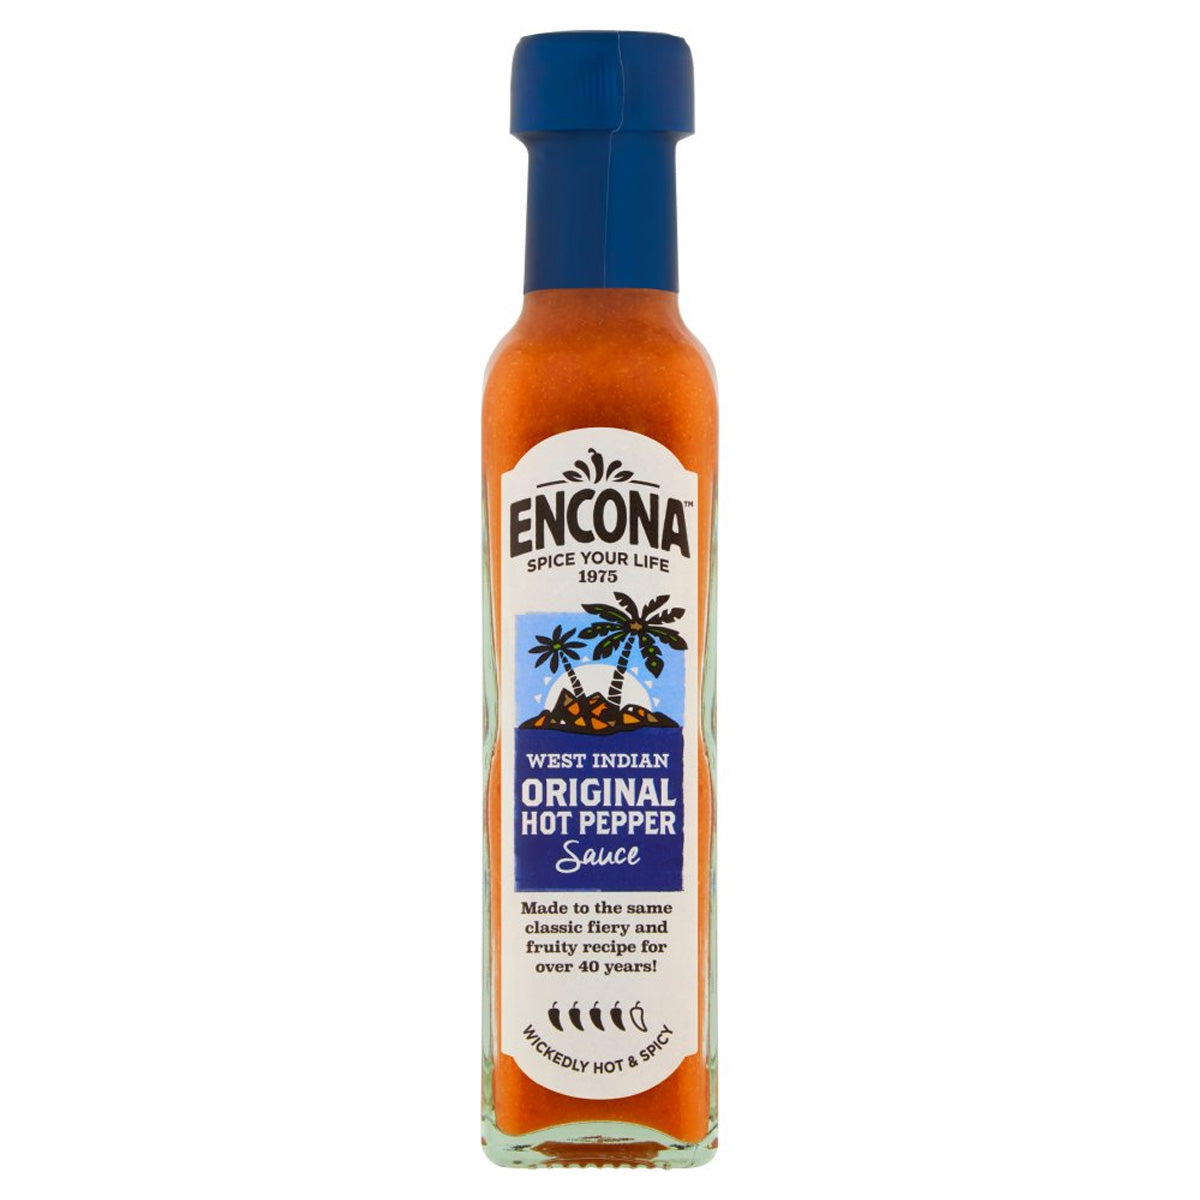 A bottle of Encona - West Indian Original Hot Pepper Sauce - 142ml on a white background.